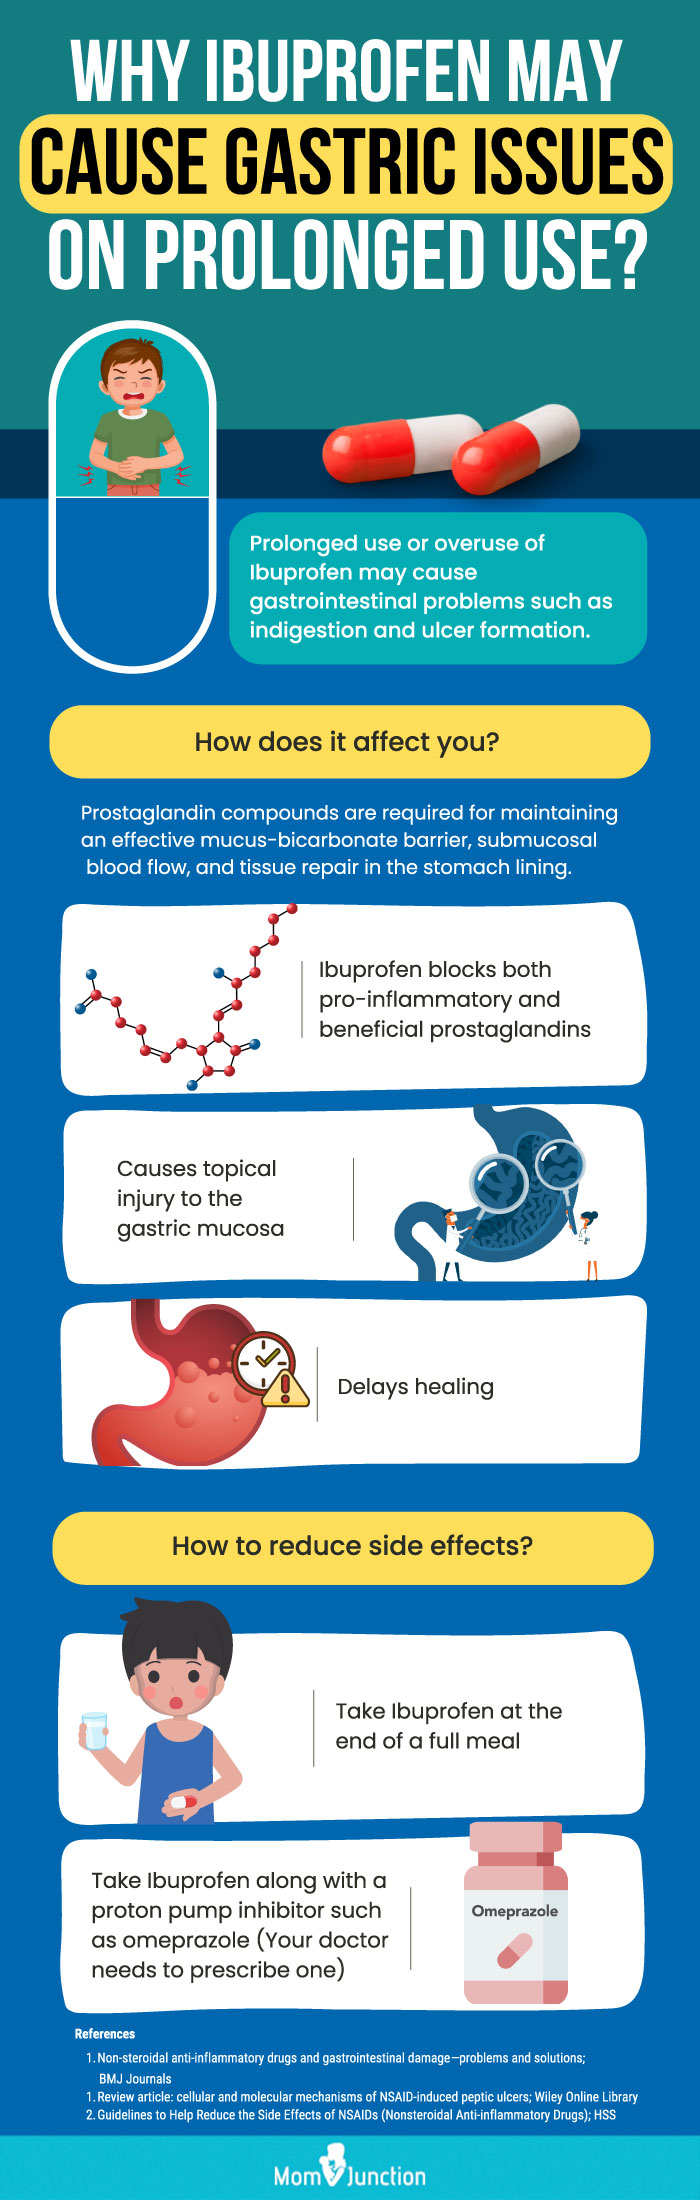 why ibuprofen may cause gastric issues on prolonged use [infographic]